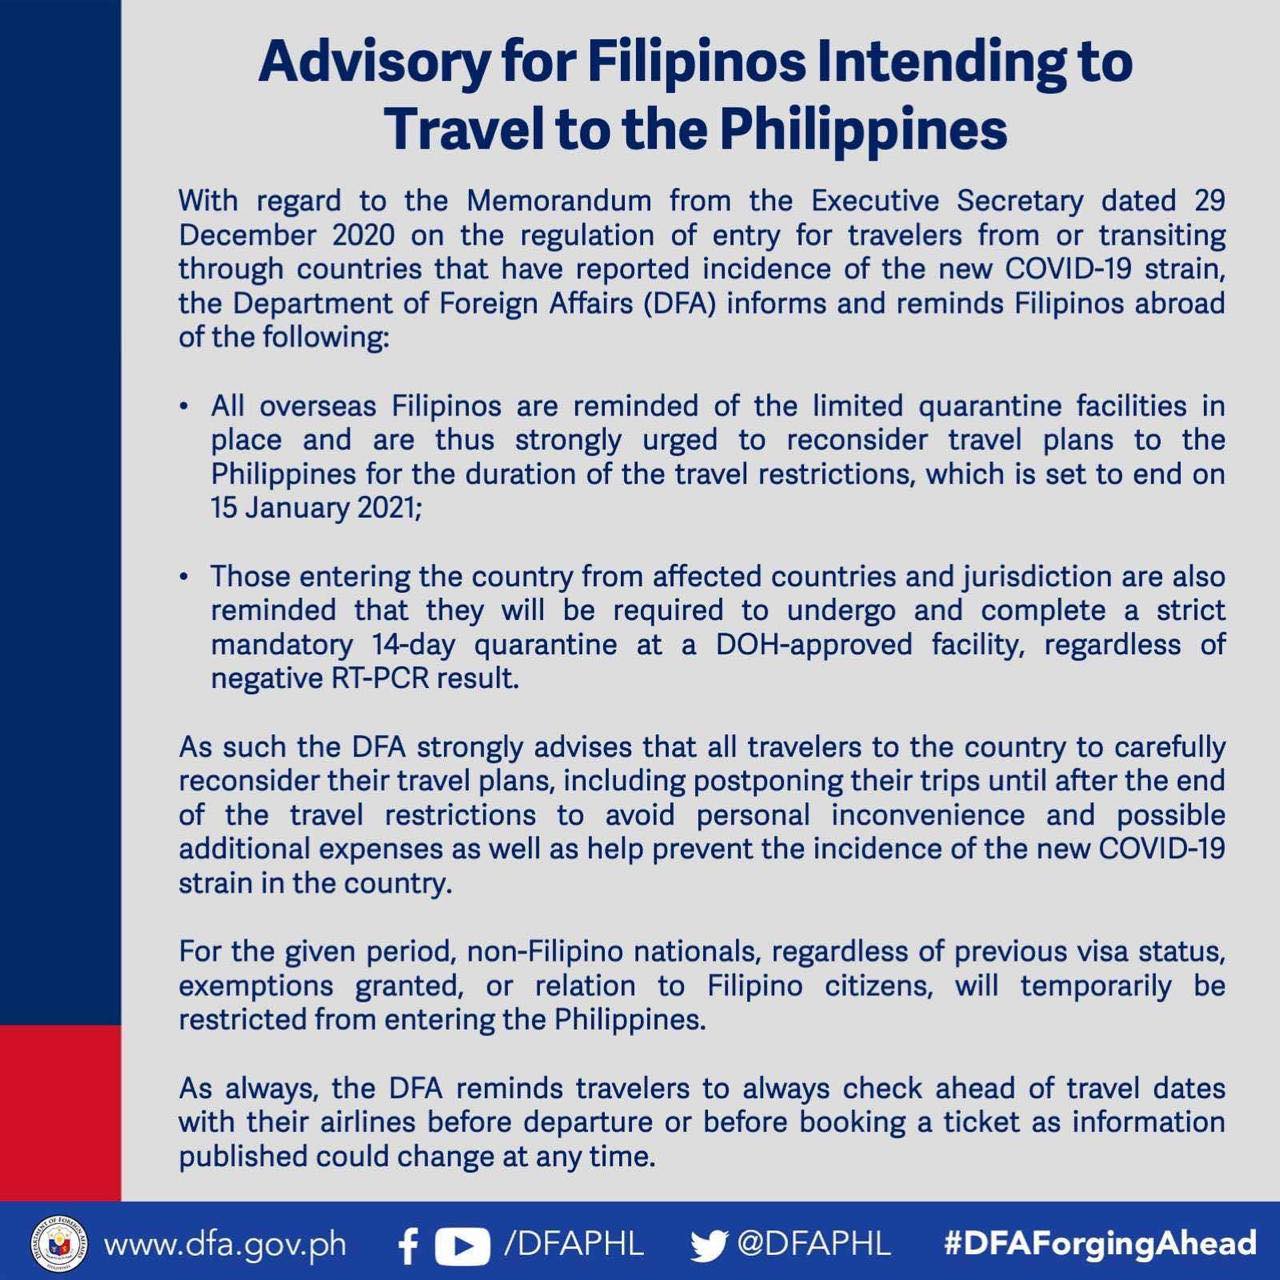 Advisory for Filipinos Intending to Travel to the Philippines